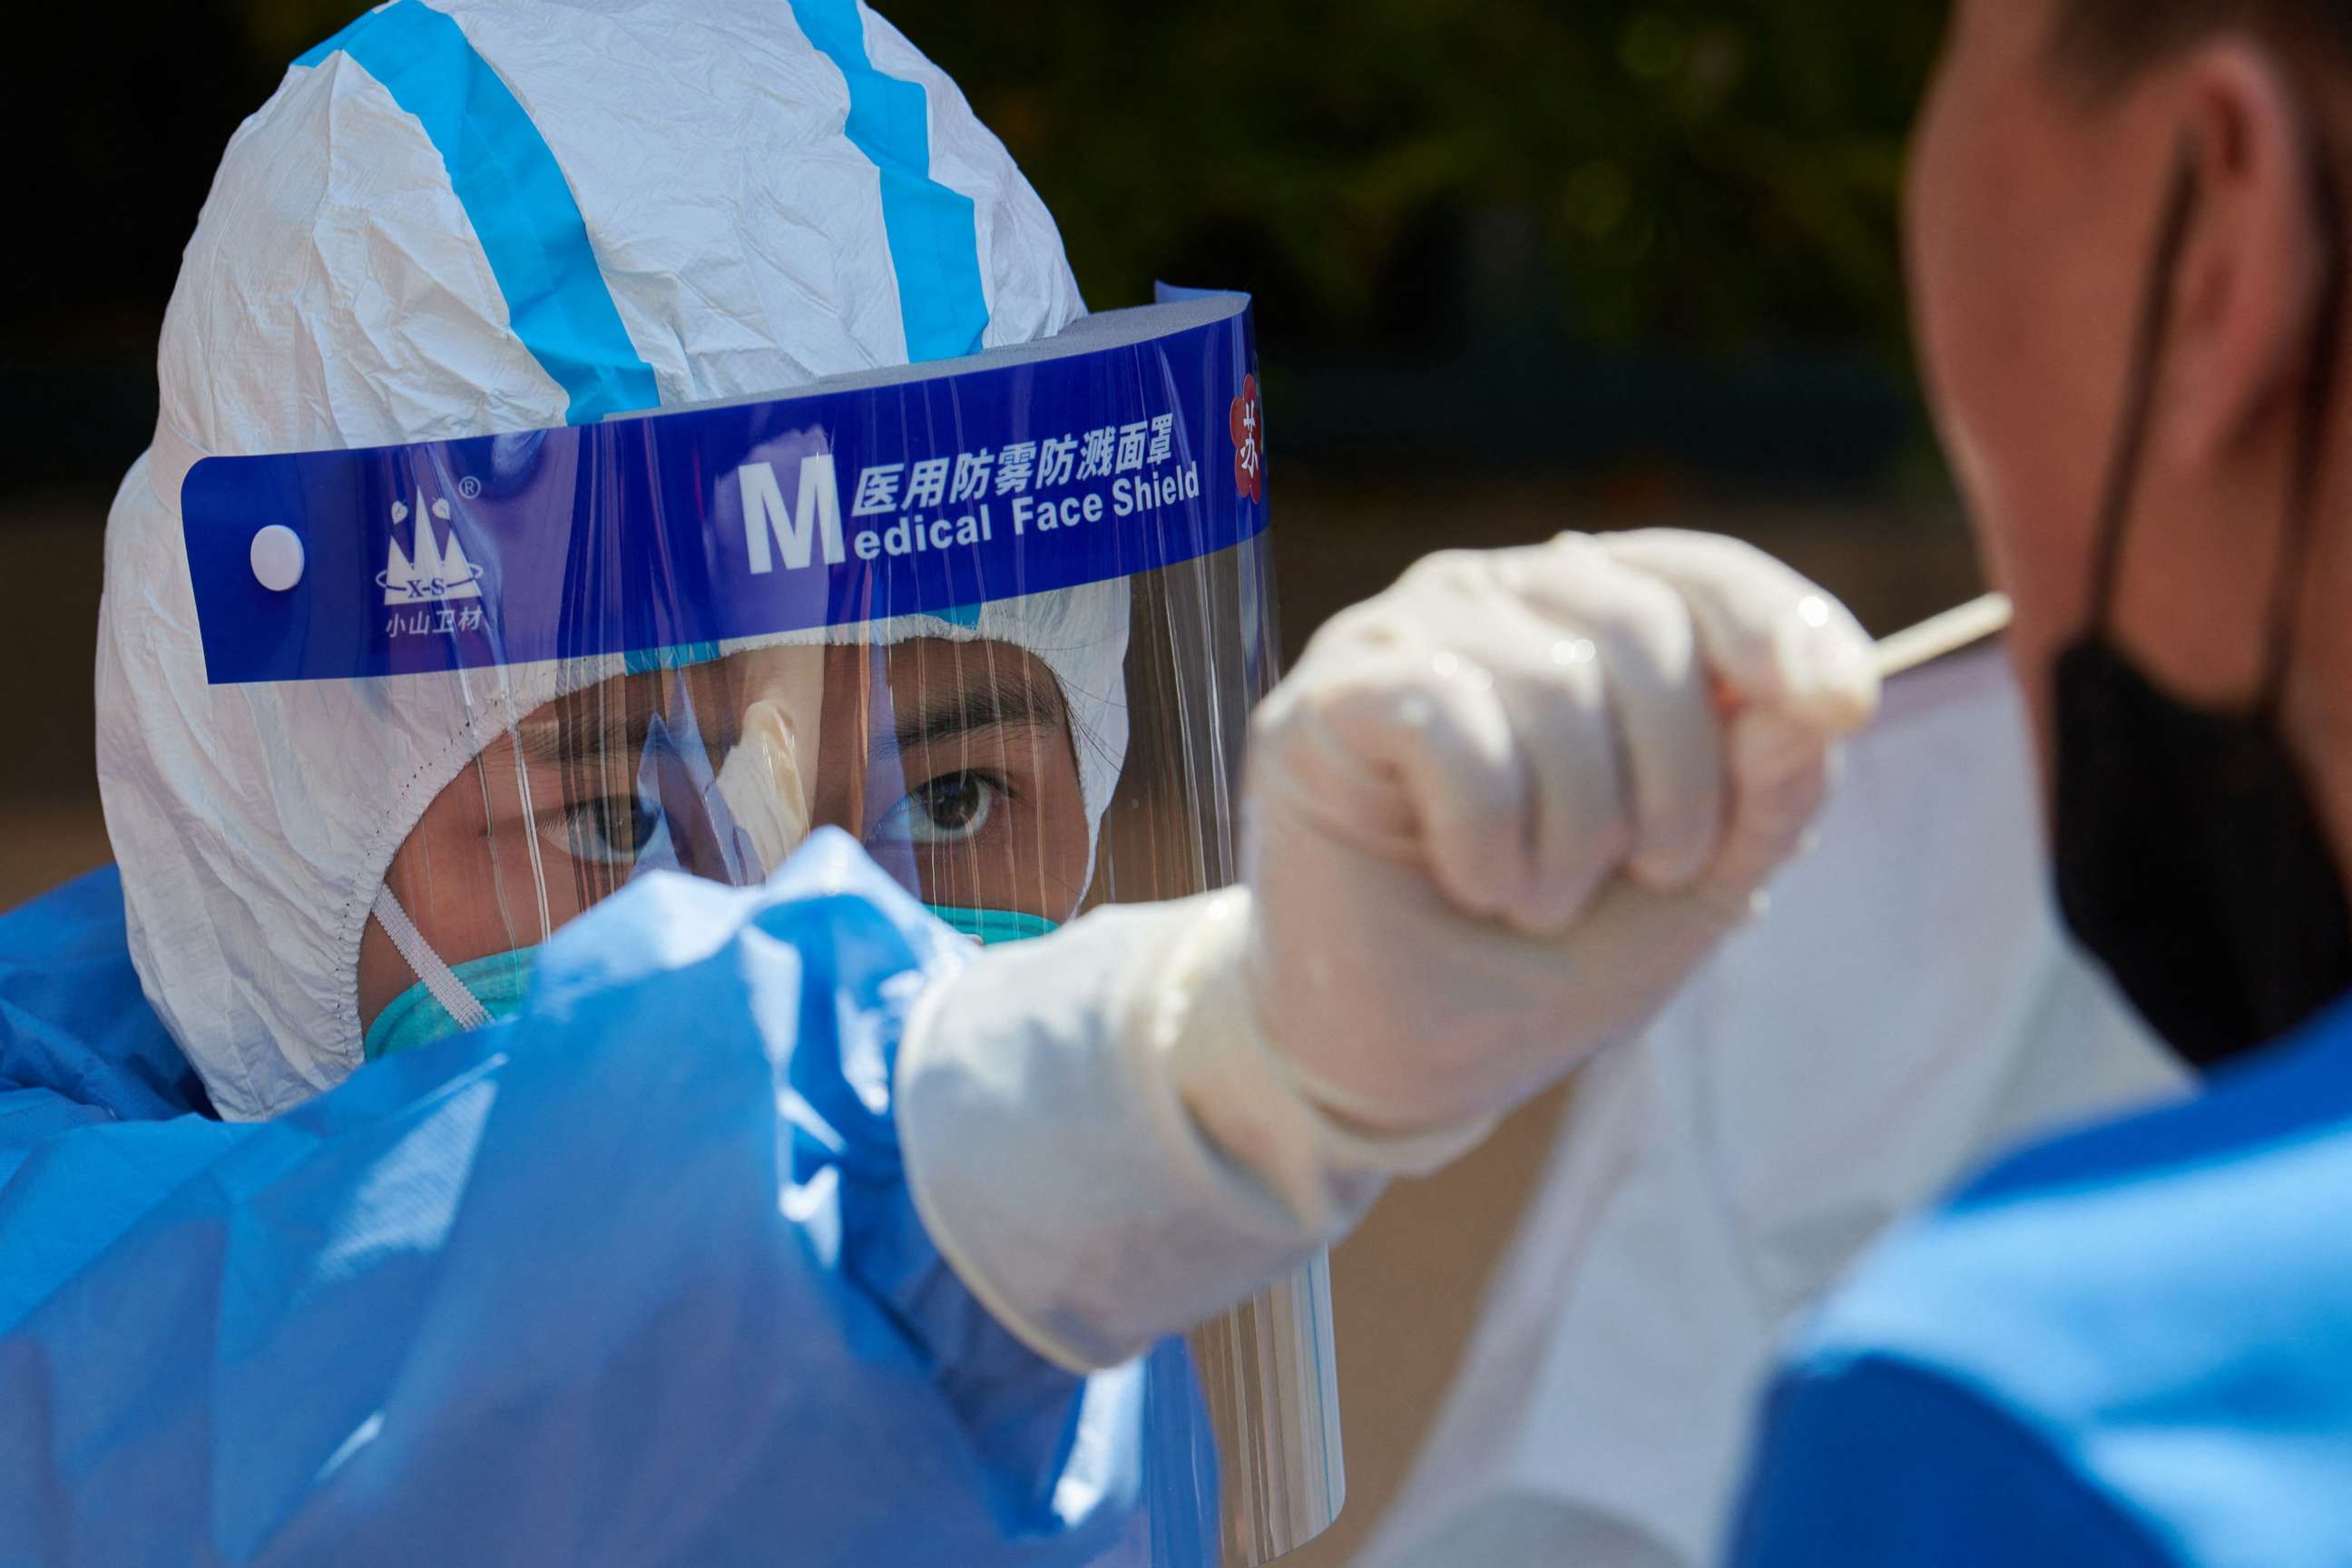 PHOTO: A health worker wearing personal protective equipment conducts a swab test for the COVID-19 coronavirus in Shanghai, April 17, 2022.